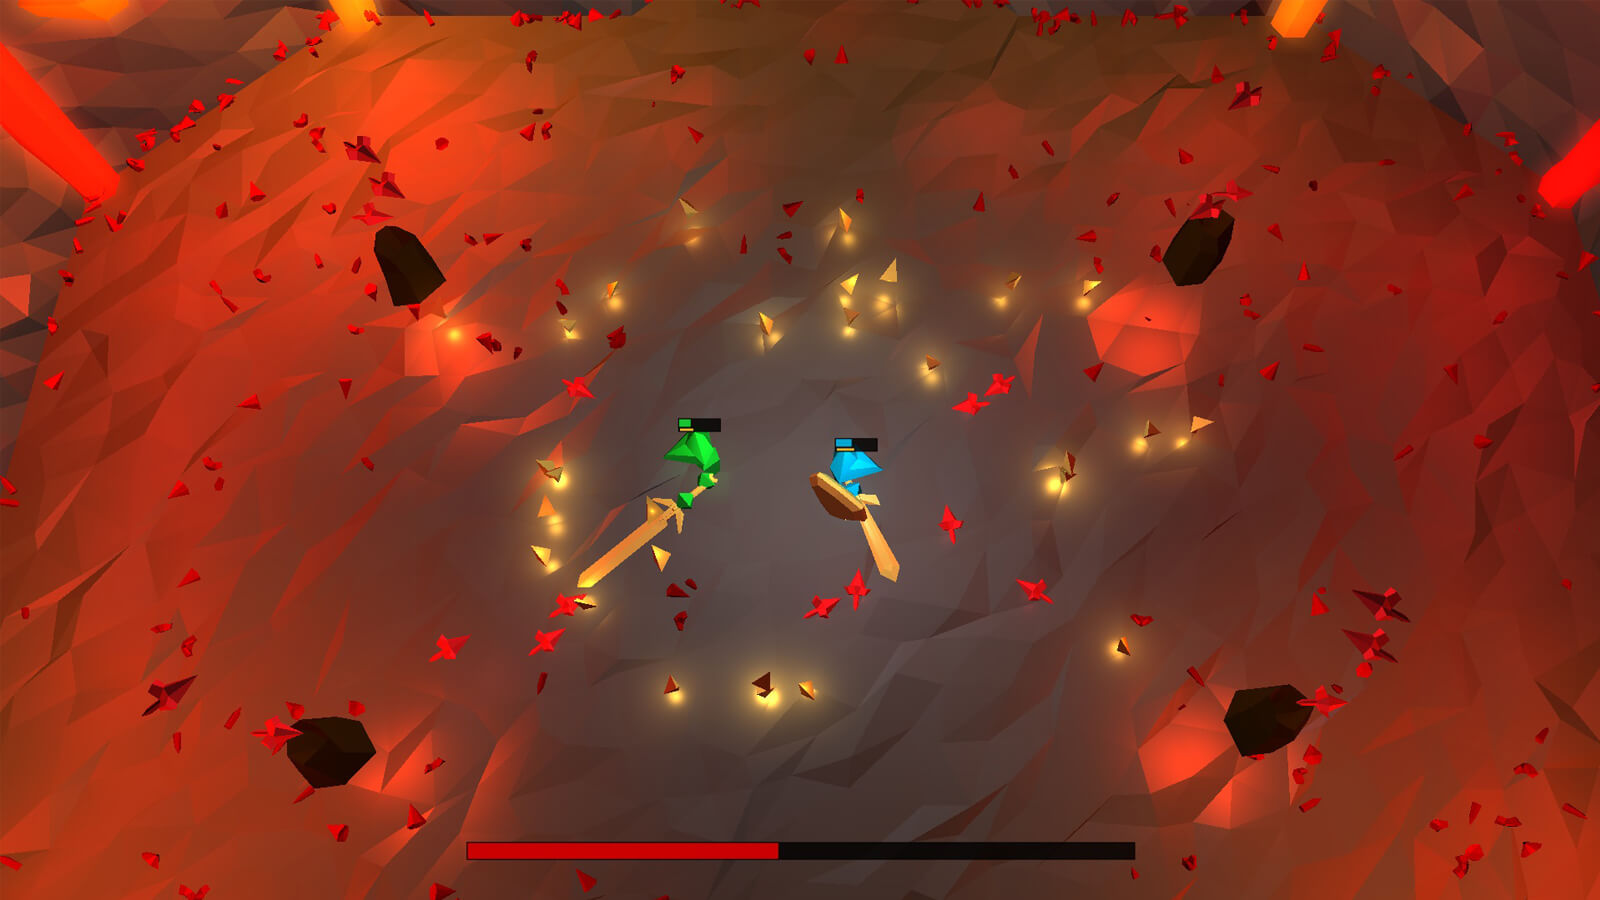 A red and blue player wield large swords in a red cavern.